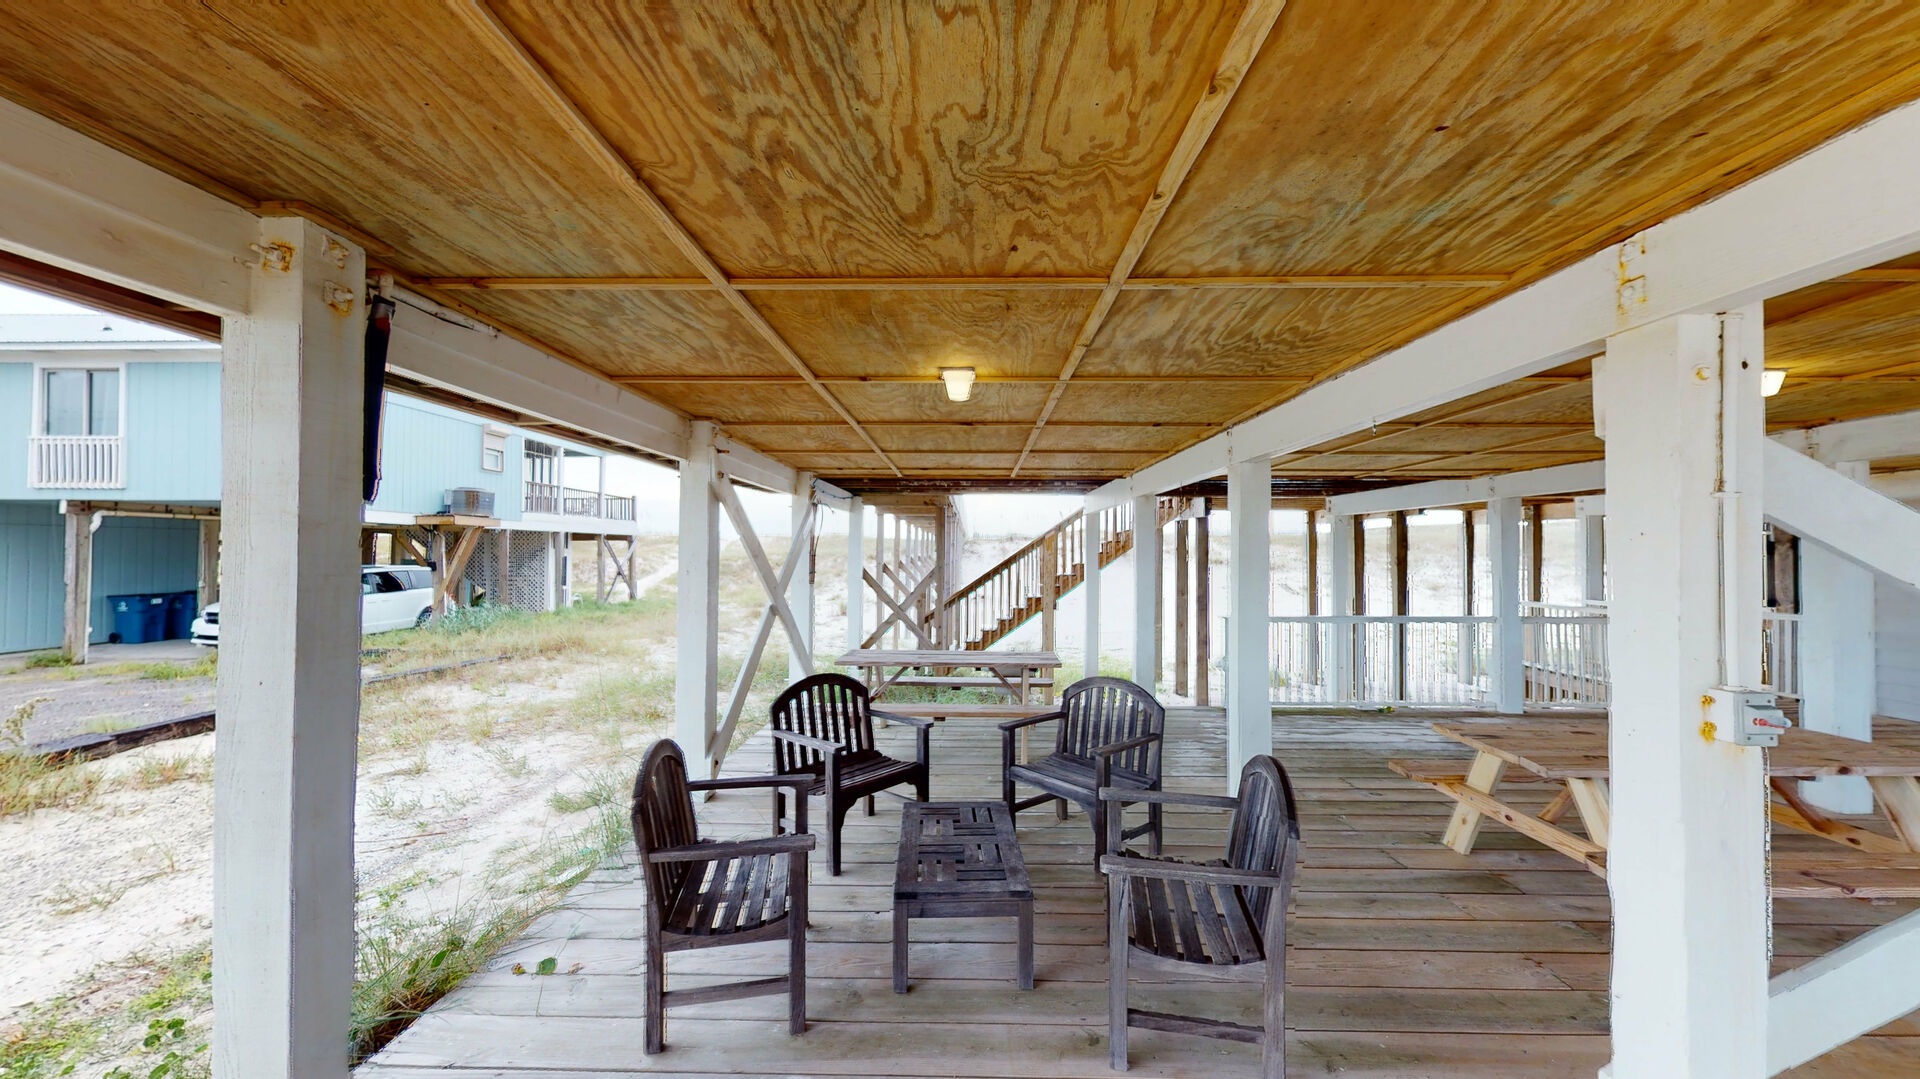 Shady area under the home with a picnic table, seating and places to hang hammocks